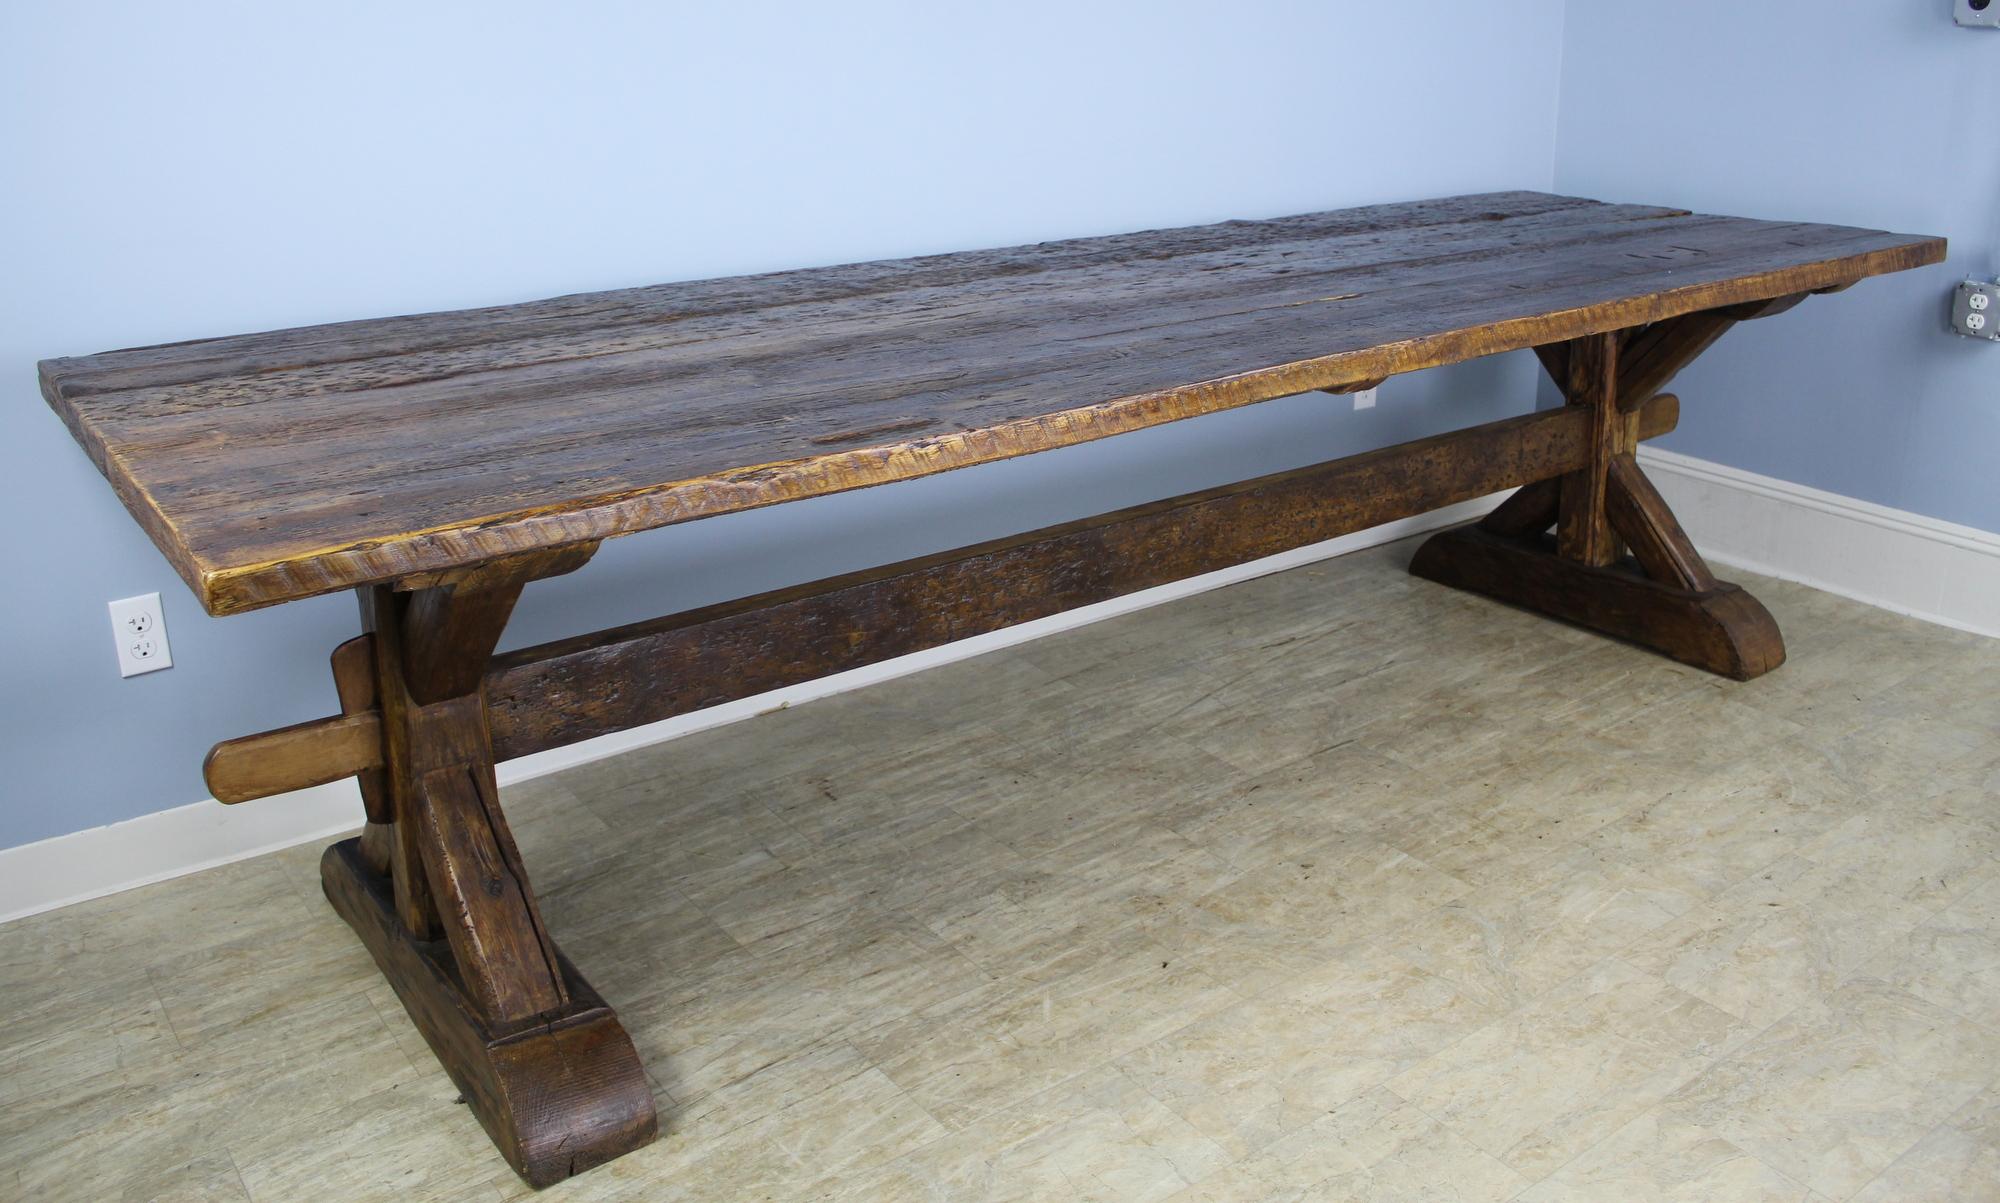 A handsome and beautifully crafted antique French refectory table with a 2 inch thick top and marvelous construction and design on the trestle base. The rustic surface on the tabletop adds an additional note of interest. With no apron or legs to get